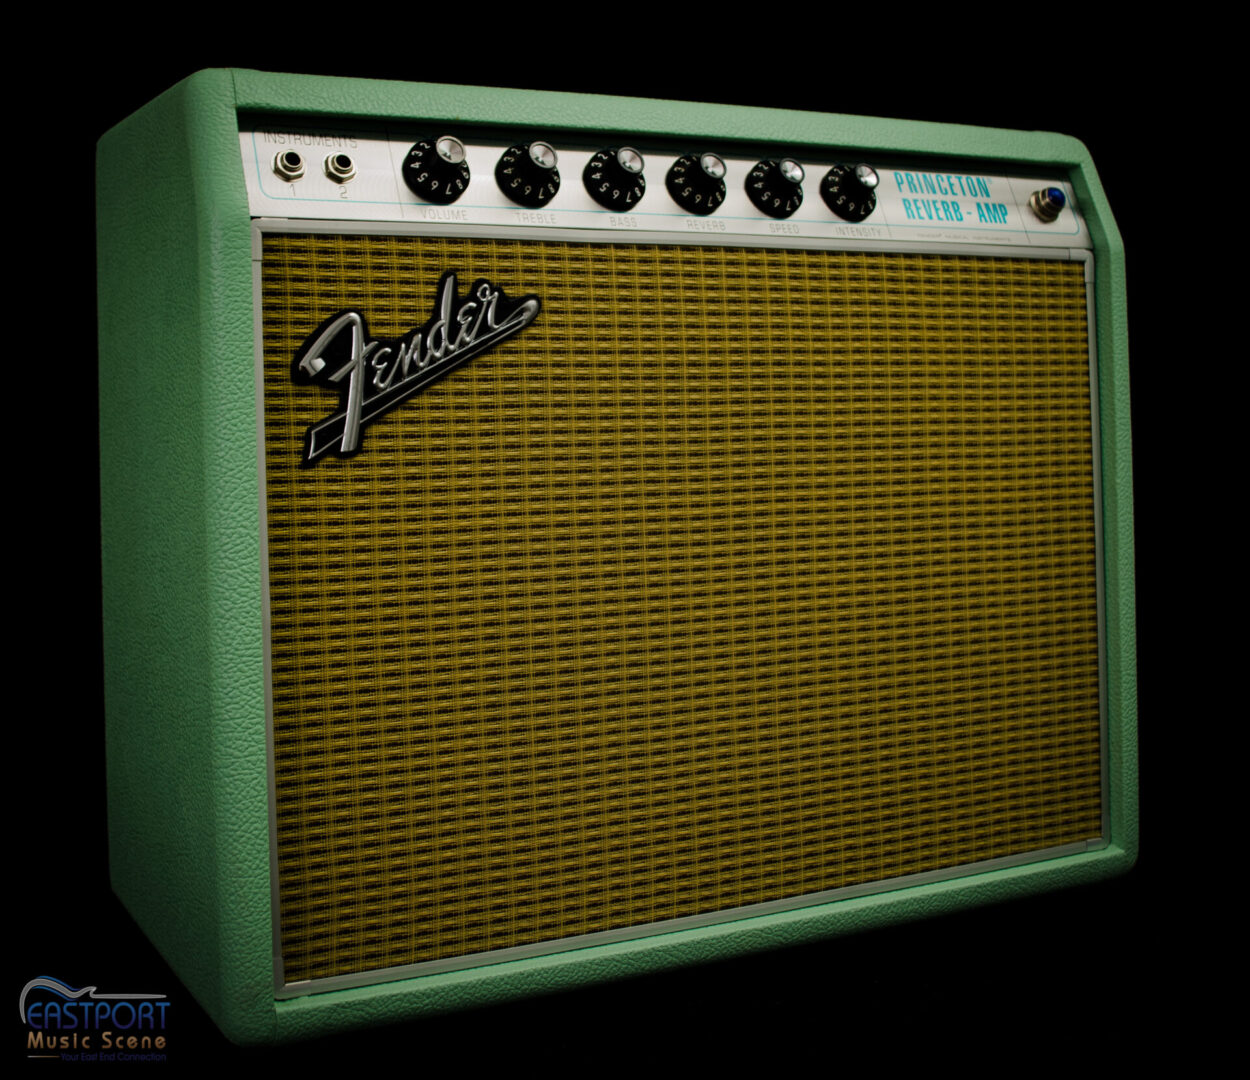 A green and white fender amplifier with black knobs.